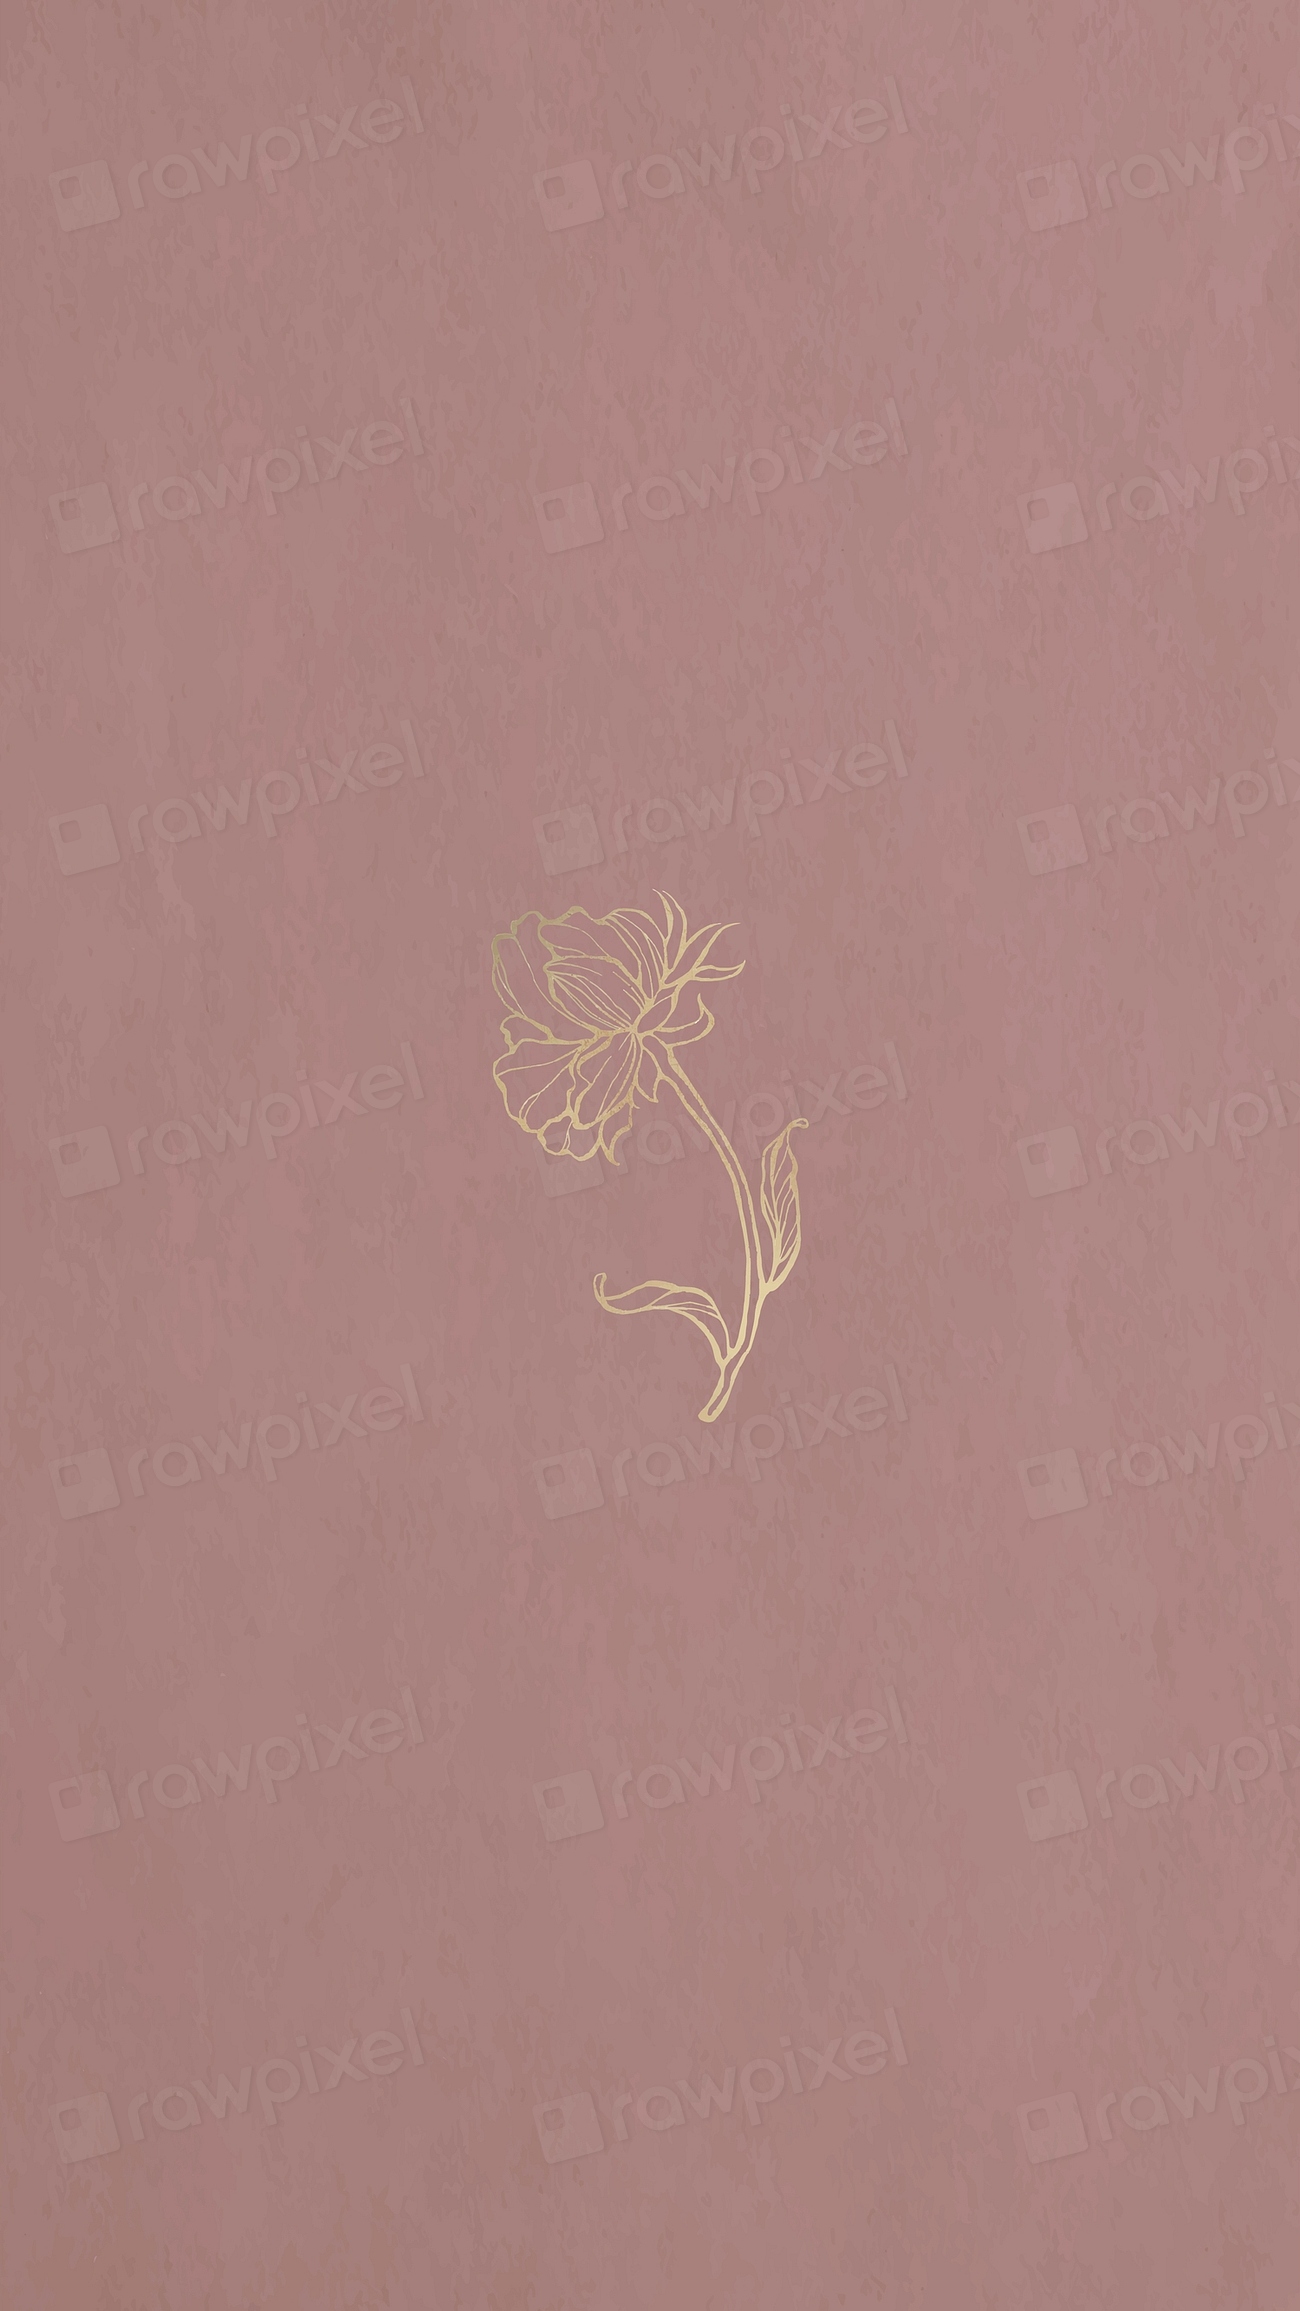 A gold flower outline mobile | Premium Vector - rawpixel